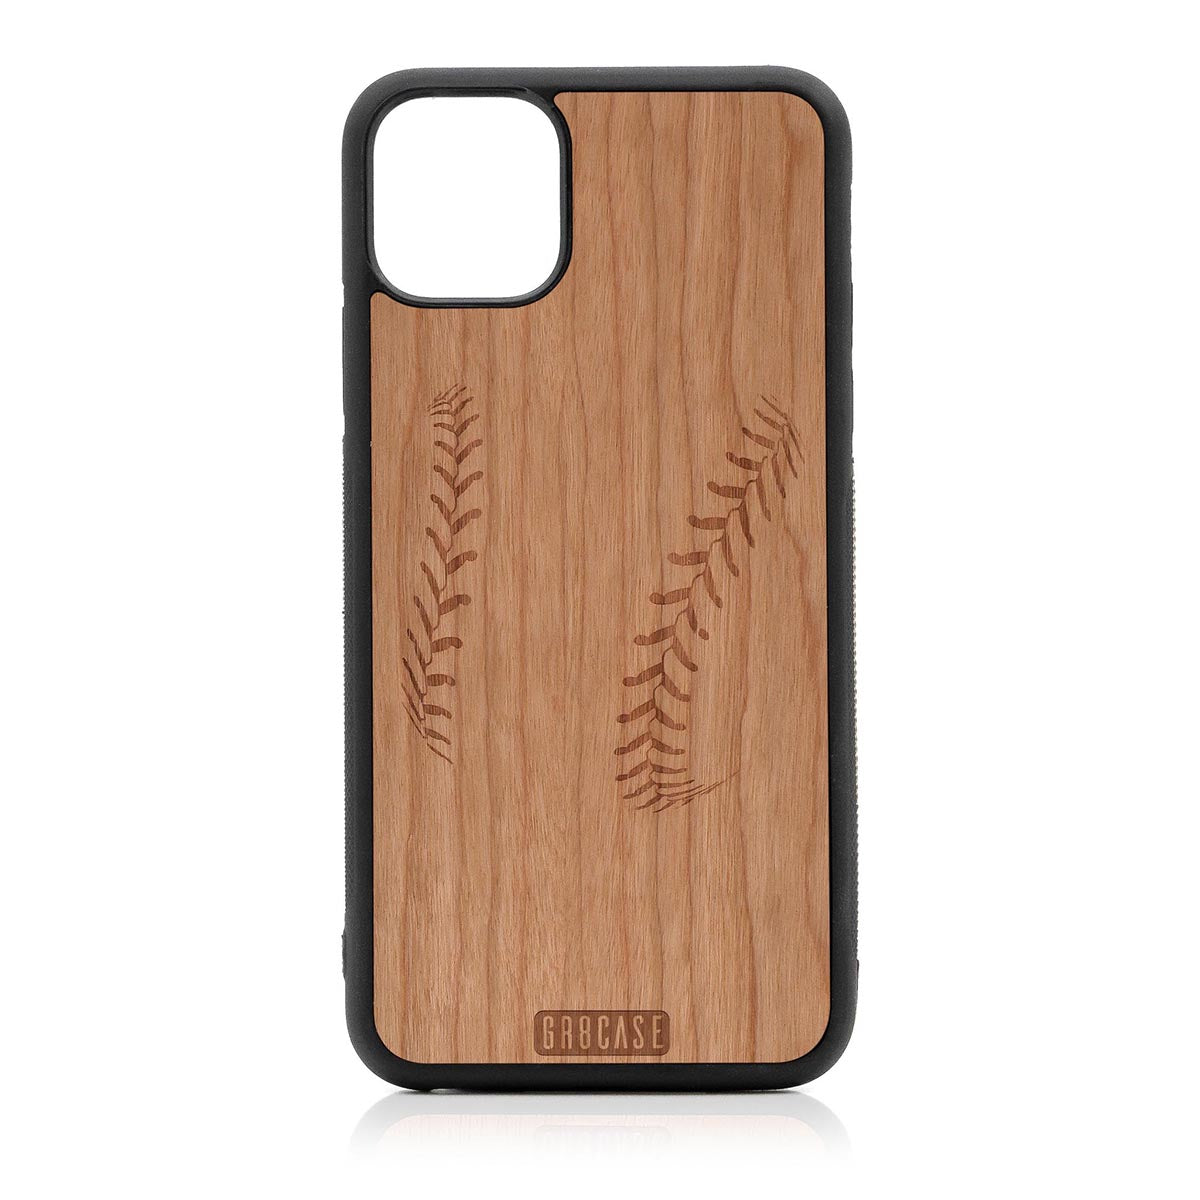 Baseball Stitches Design Wood Case For iPhone 11 Pro Max by GR8CASE